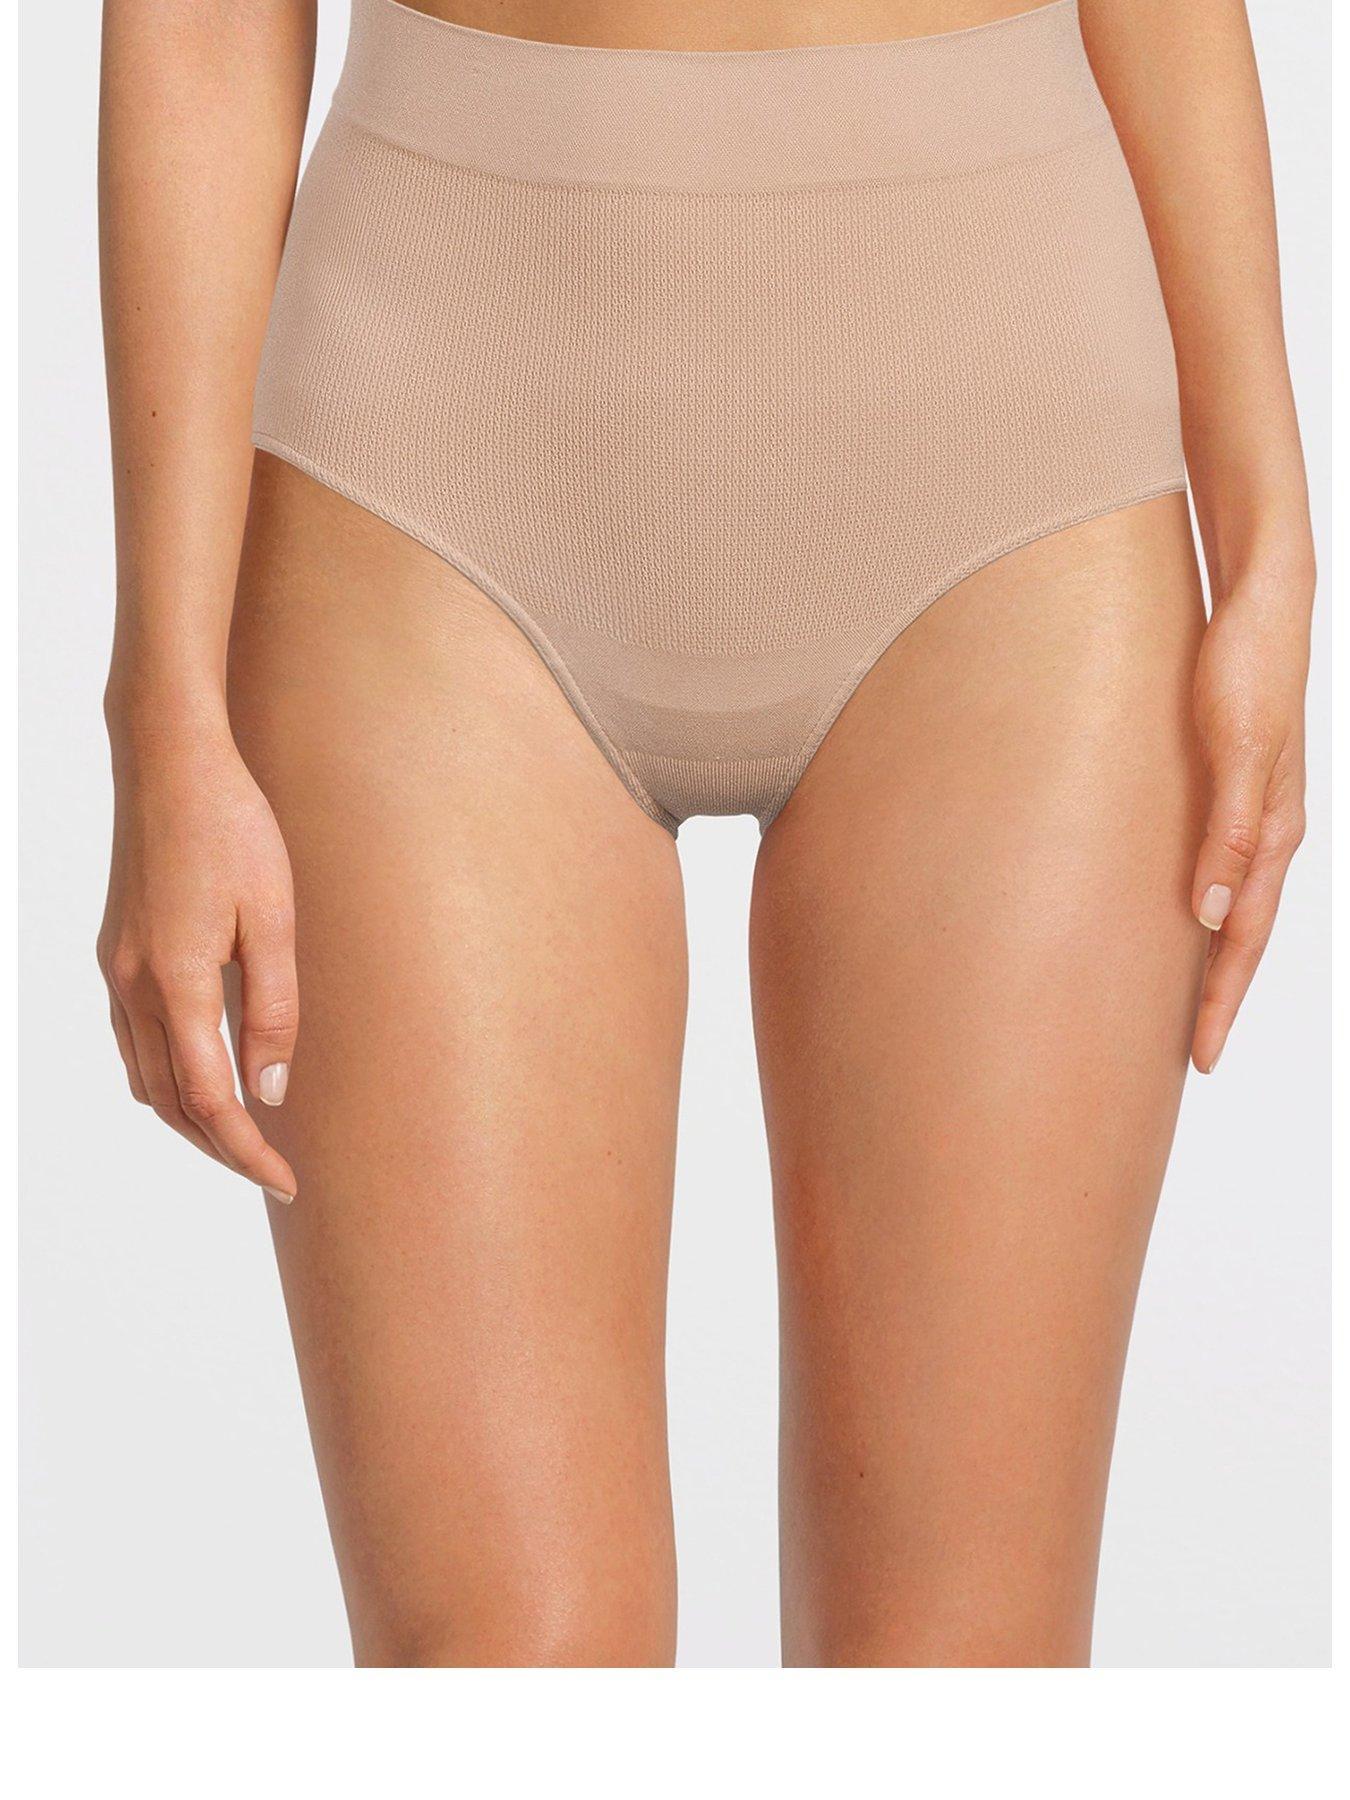 Miraclesuit Sexy Sheer Shaping Hi-Waist Brief- Black/Nude